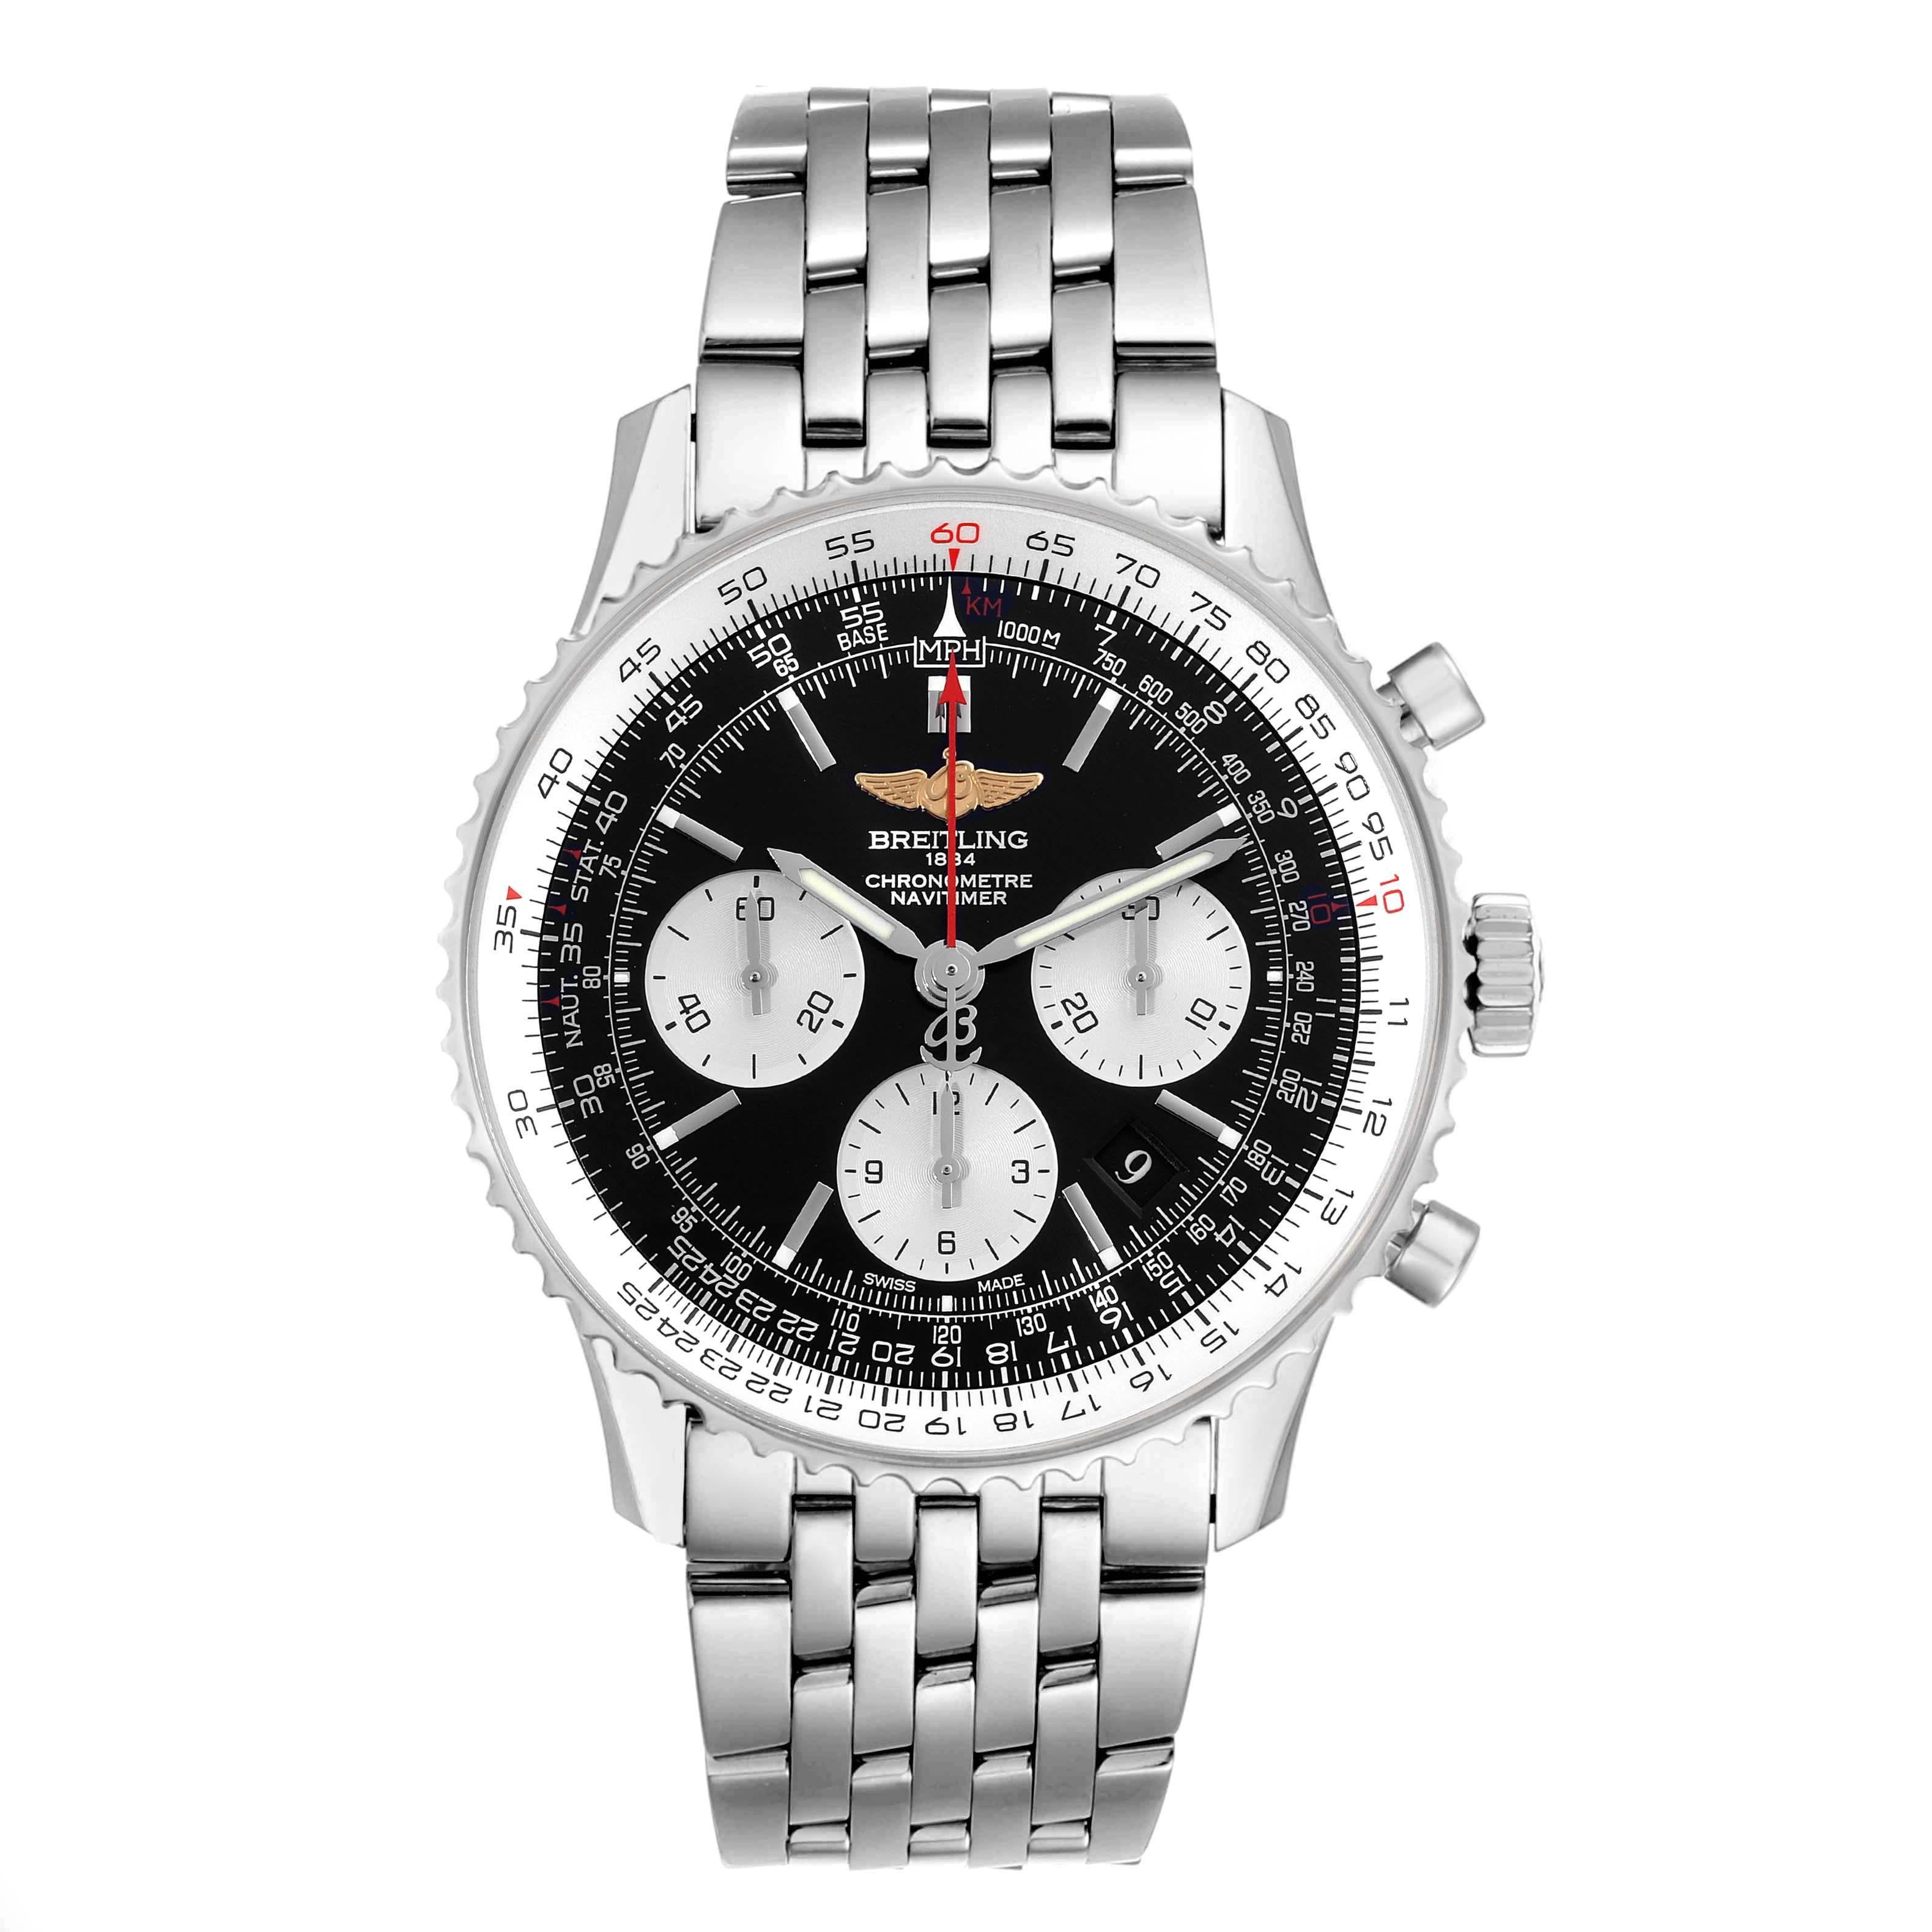 Breitling Navitimer 01 Black Dial Steel Mens Watch AB0120 Card. Automatic self-winding officially certified chronometer movement. Chronograph function. Stainless steel case 43.0 mm in diameter. Breitling logo on the crown. Stainless steel